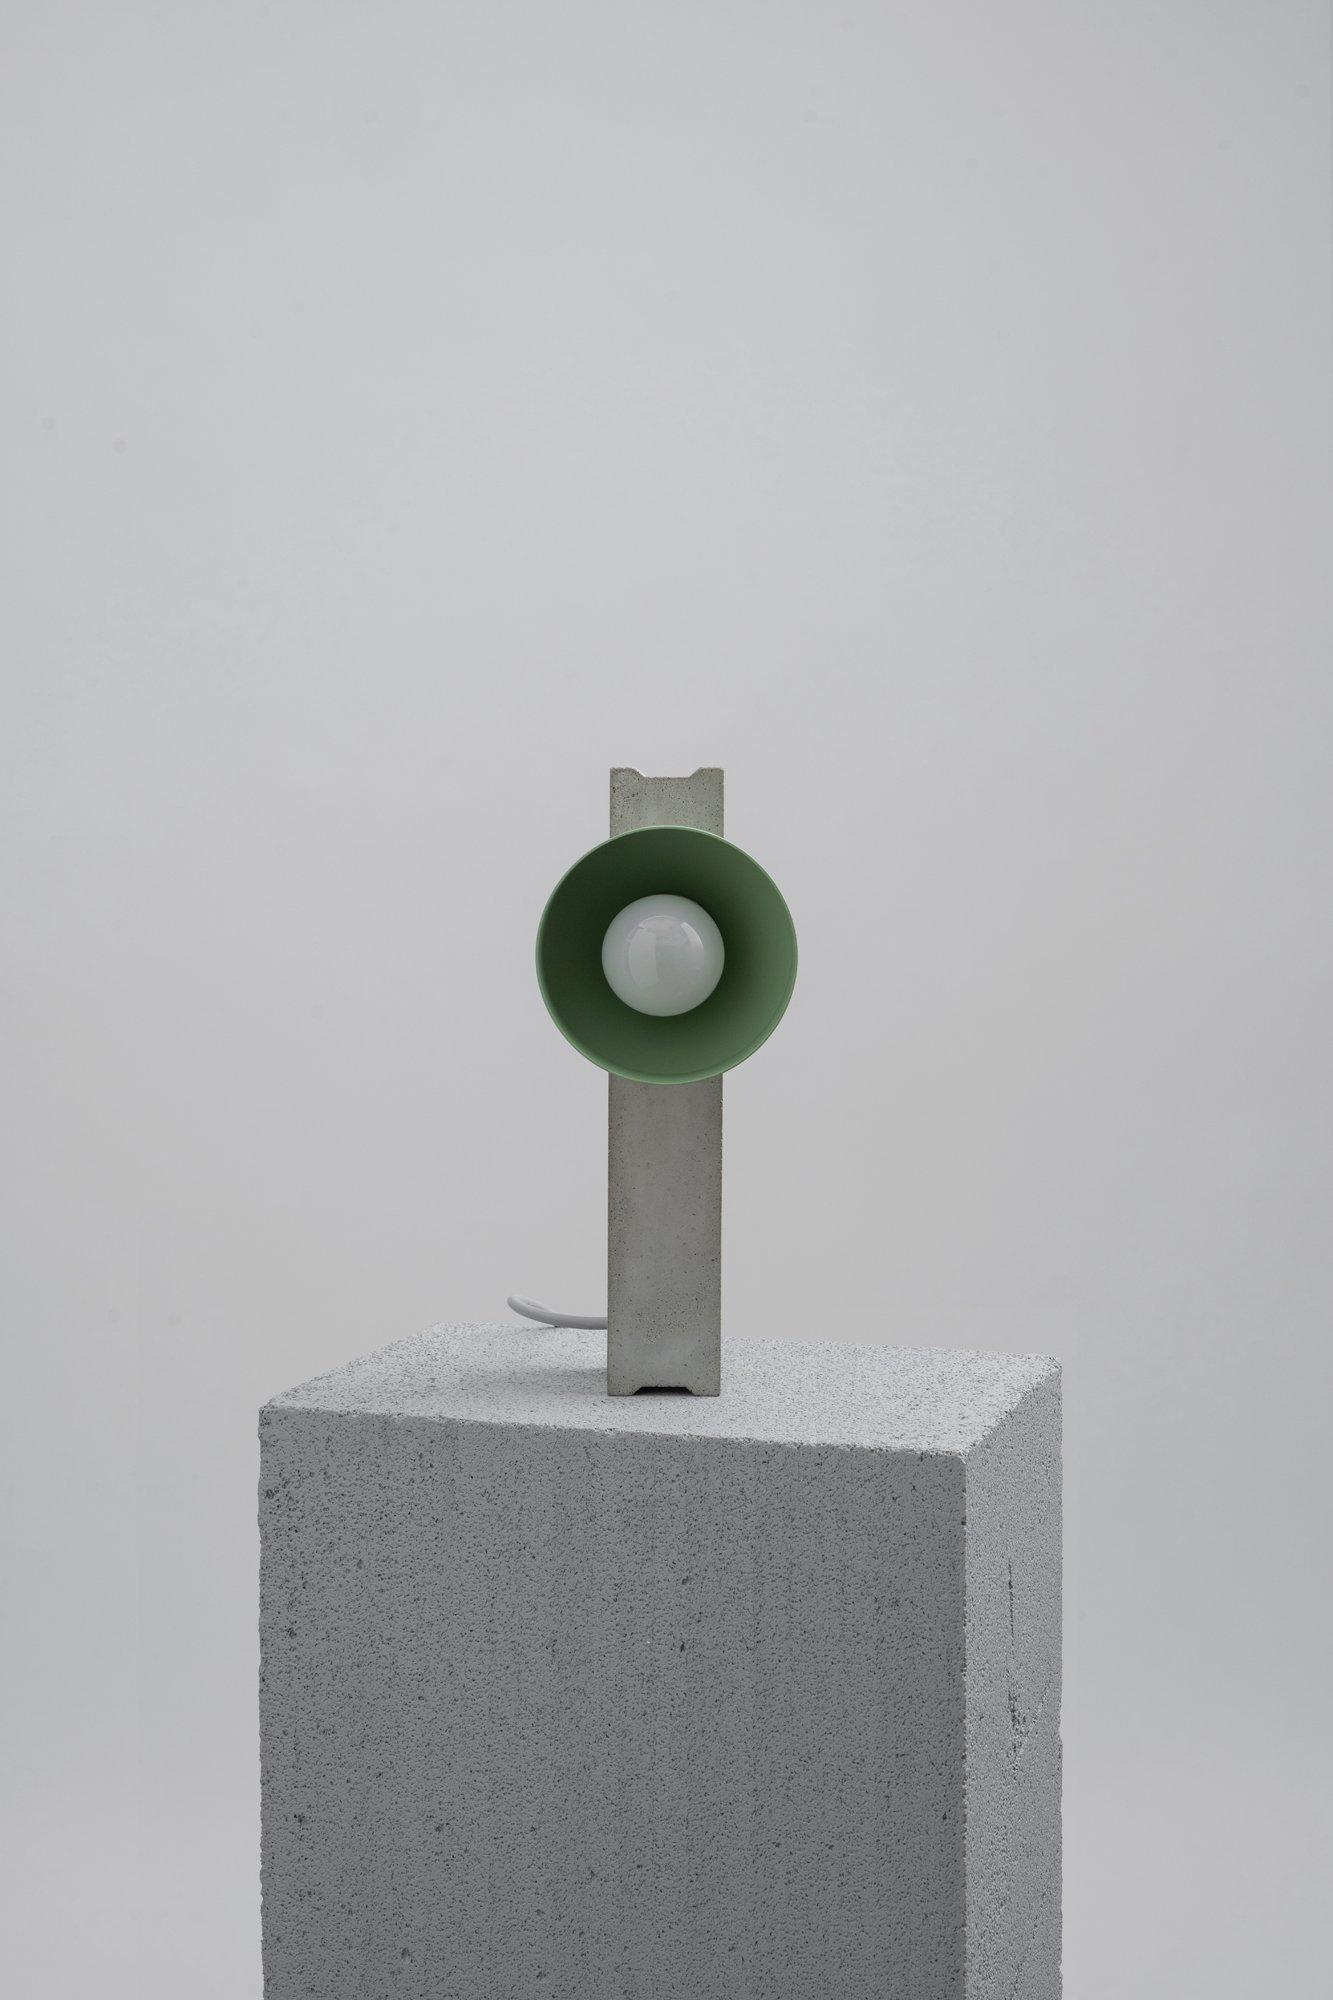 Moss Block Table Lamp by +kouple
Dimensions: D 26 x W 10 x H 12,7 cm.
Materials: Concrete, powder-coated steel and textile. 

Available in different color options. Please contact us.

All our lamps can be wired according to each country. If sold to